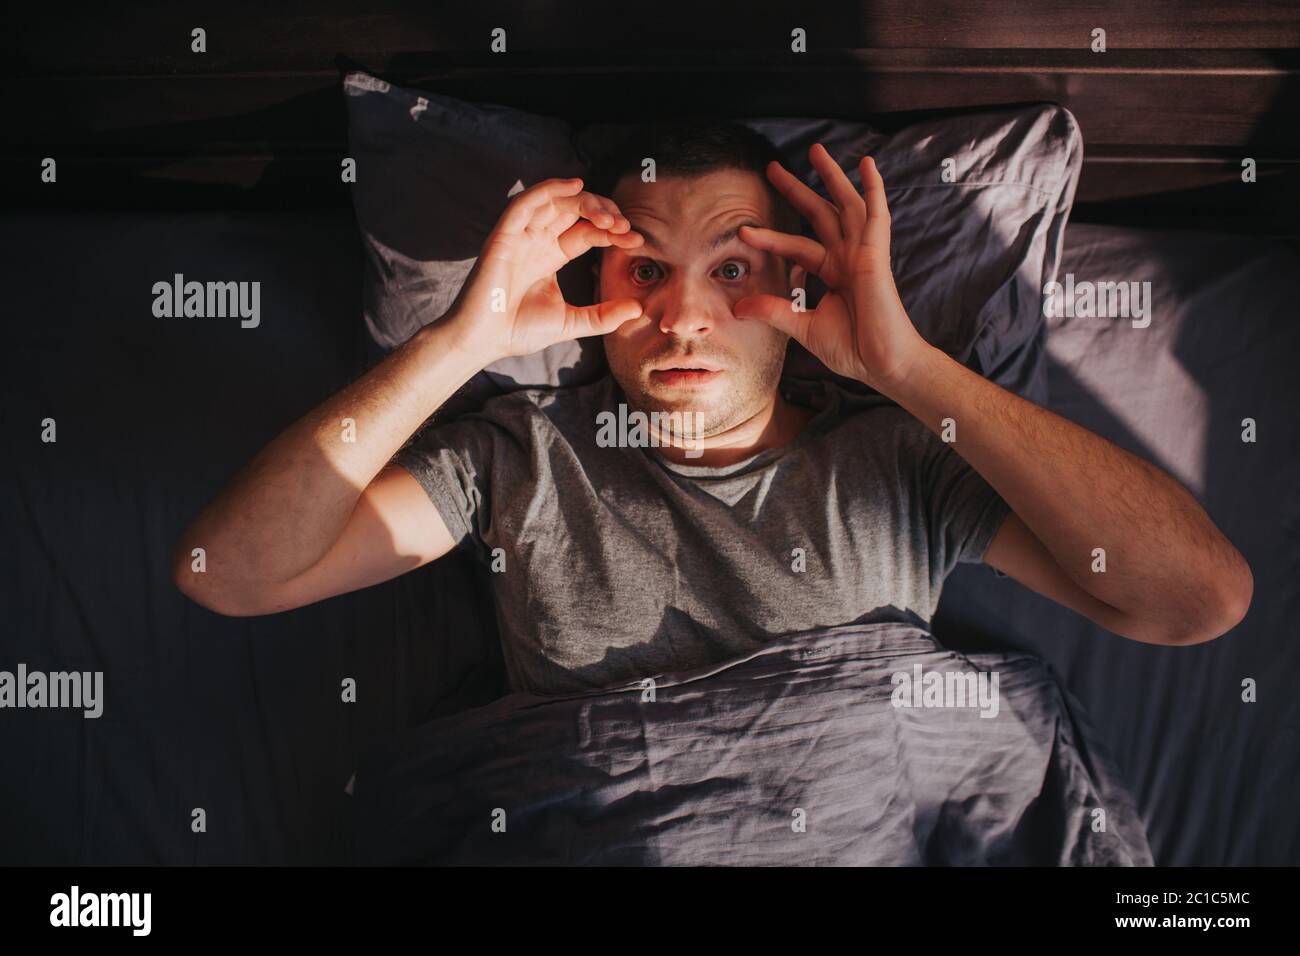 Can't wake up. Feeling unwell in the morning. A man in his bed in the morning Stock Photo